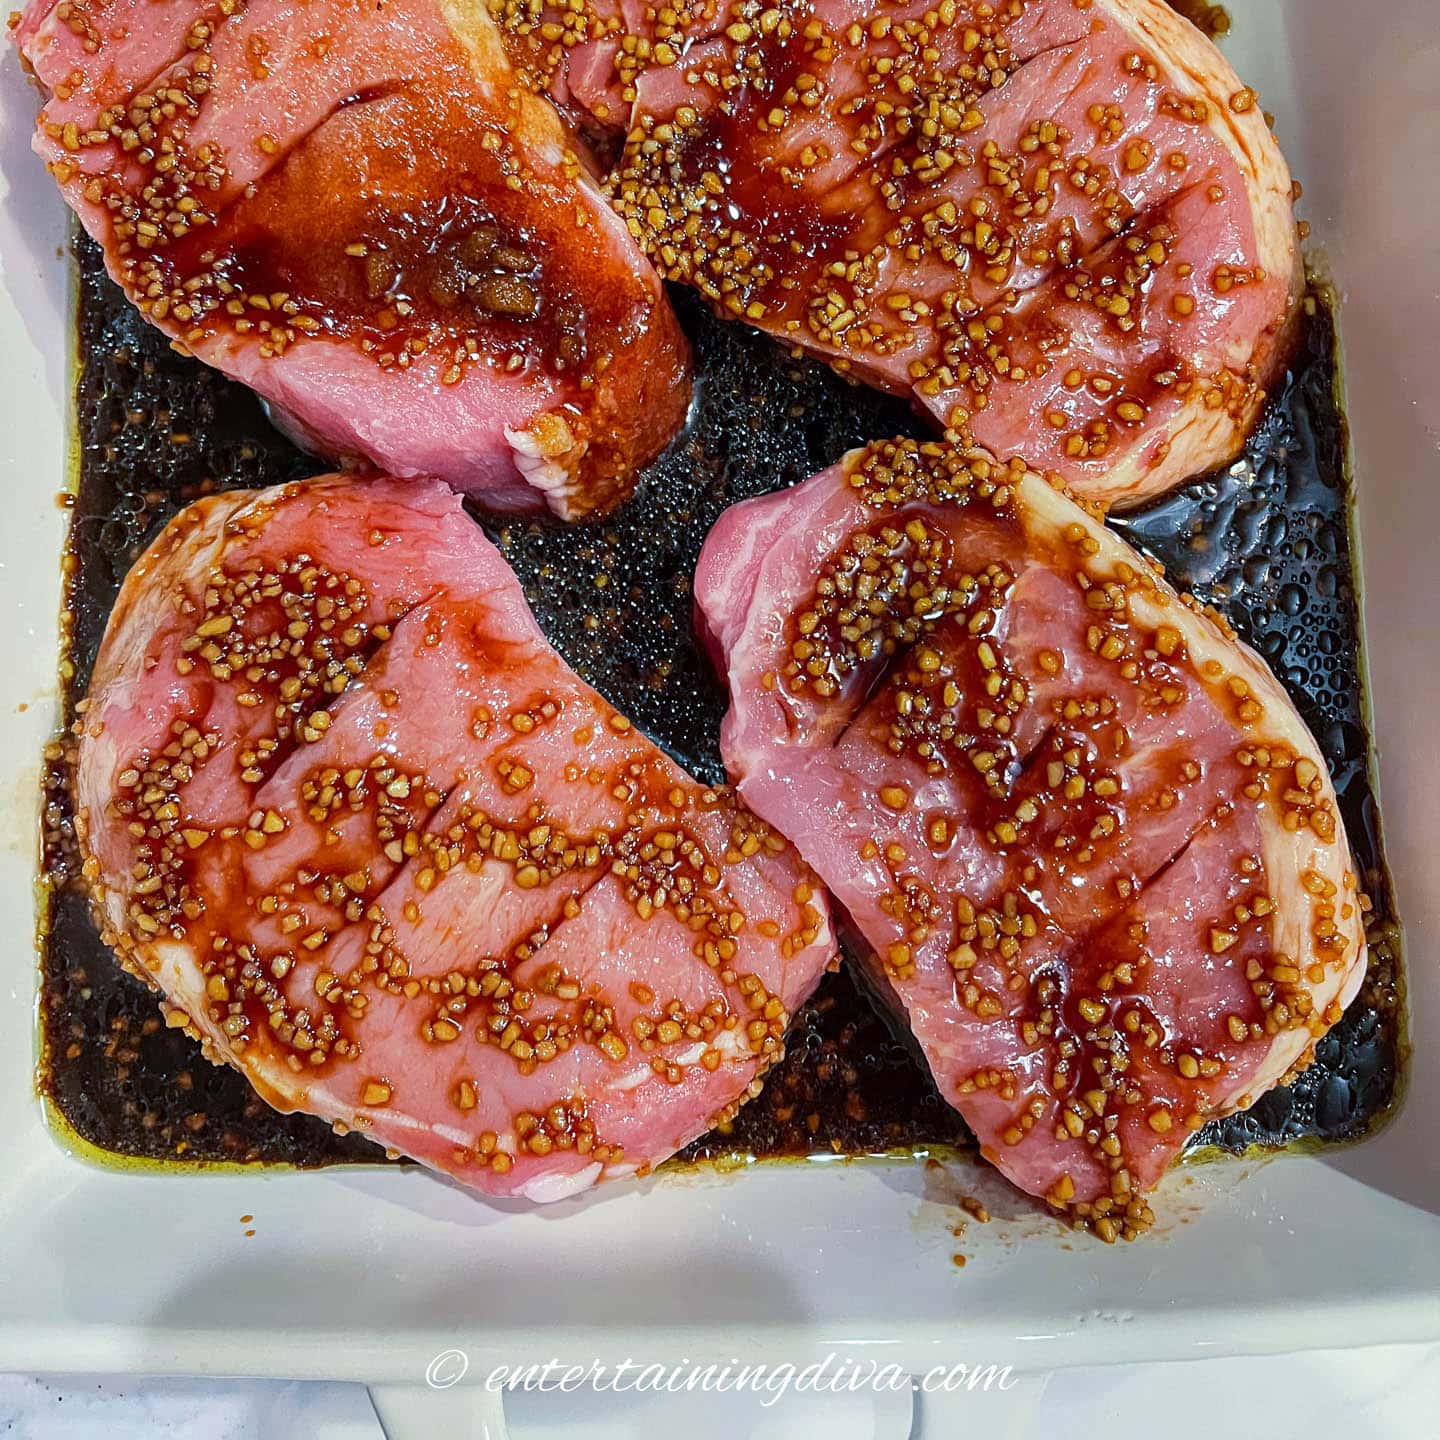 Thick cut pork chops covered in marinade